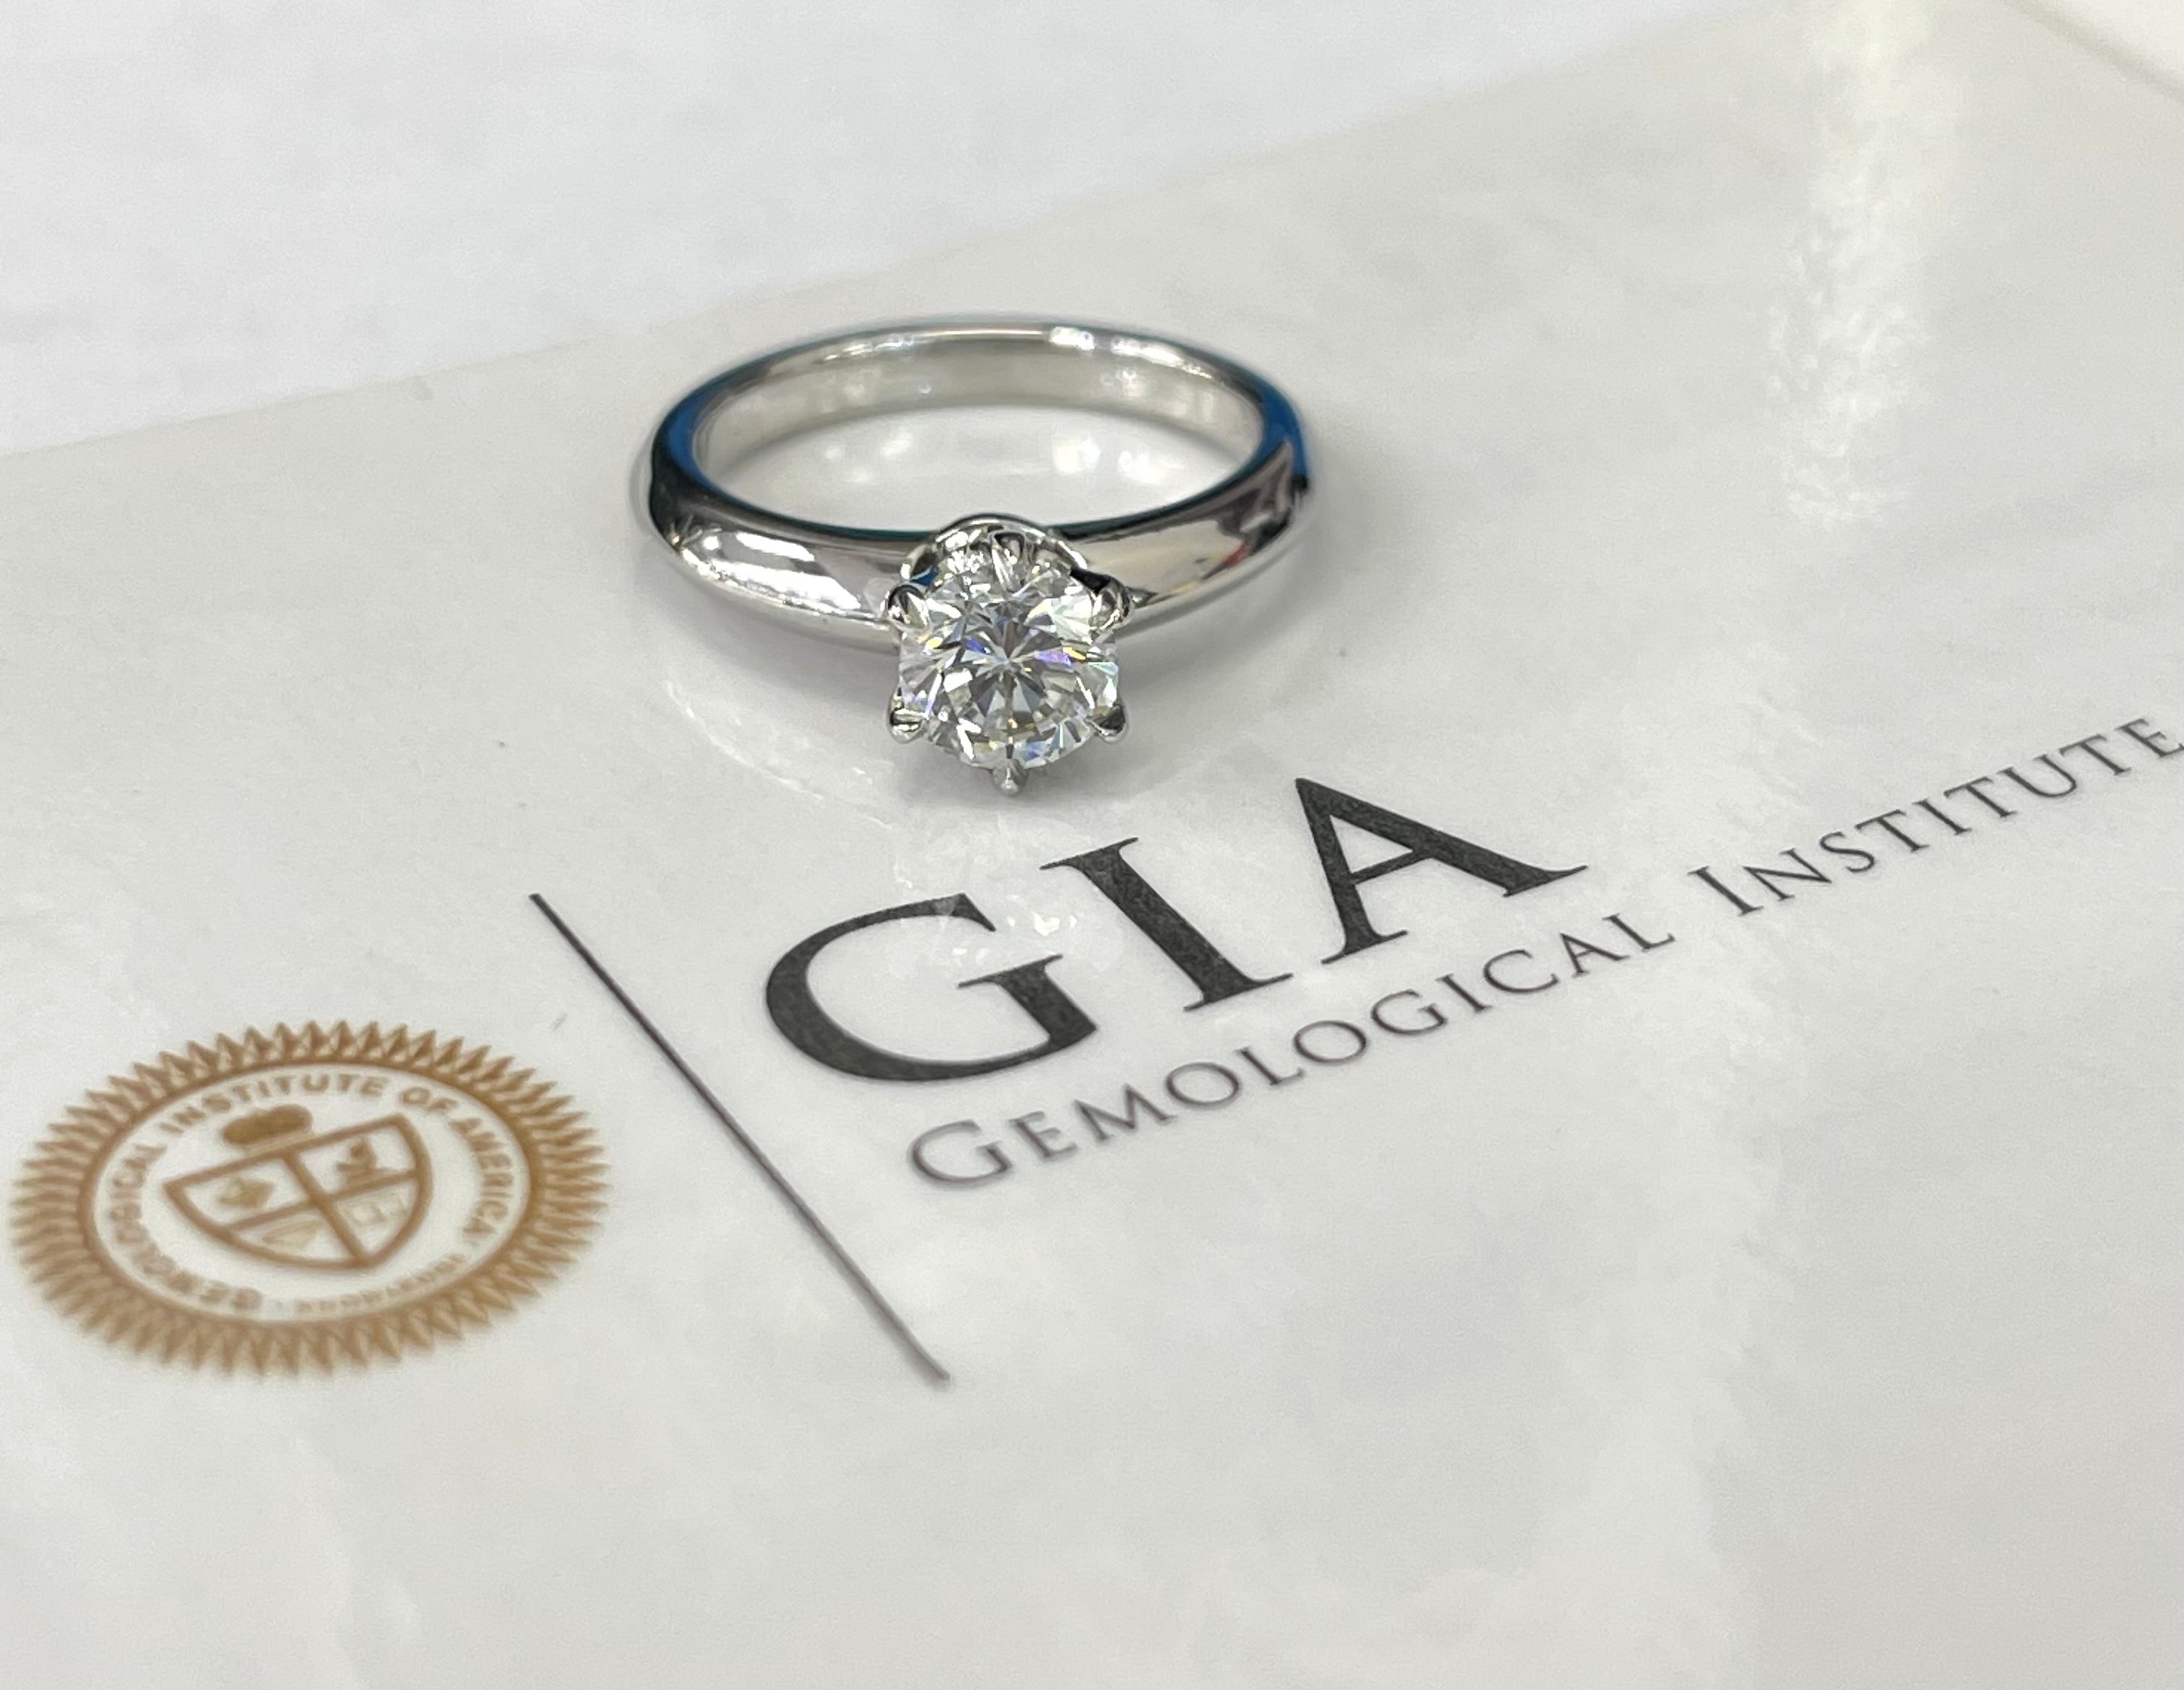 GIA Certified Round Brilliants Solitaire Diamond Ring .72 carats